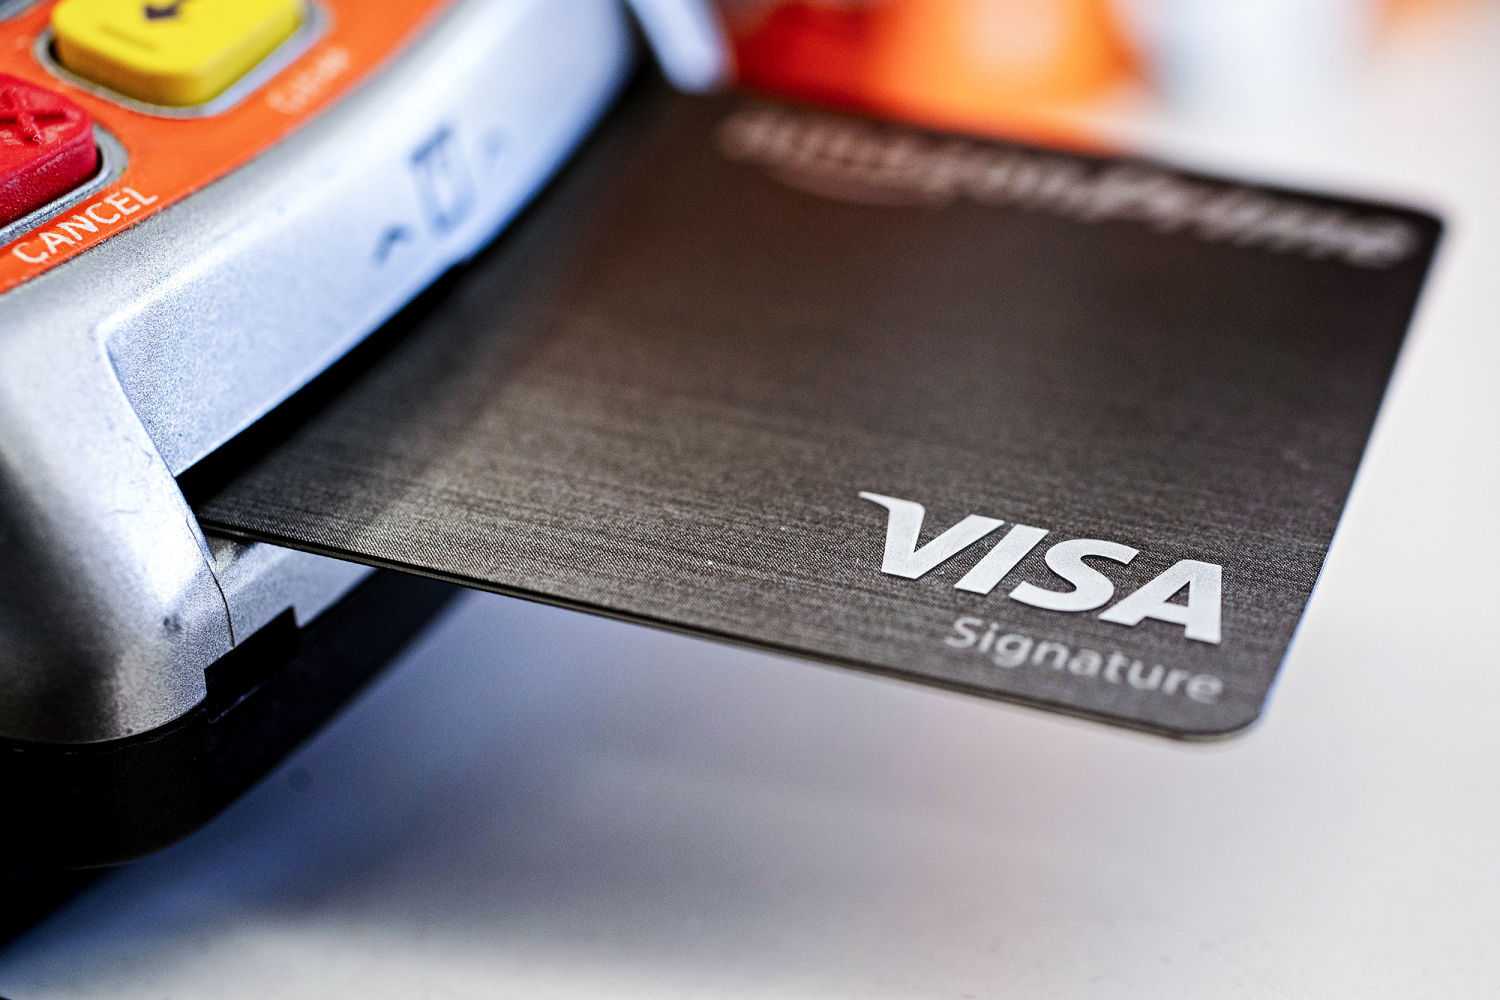 Visa and MasterCard settle long-running antitrust suit over swipe fees with merchants